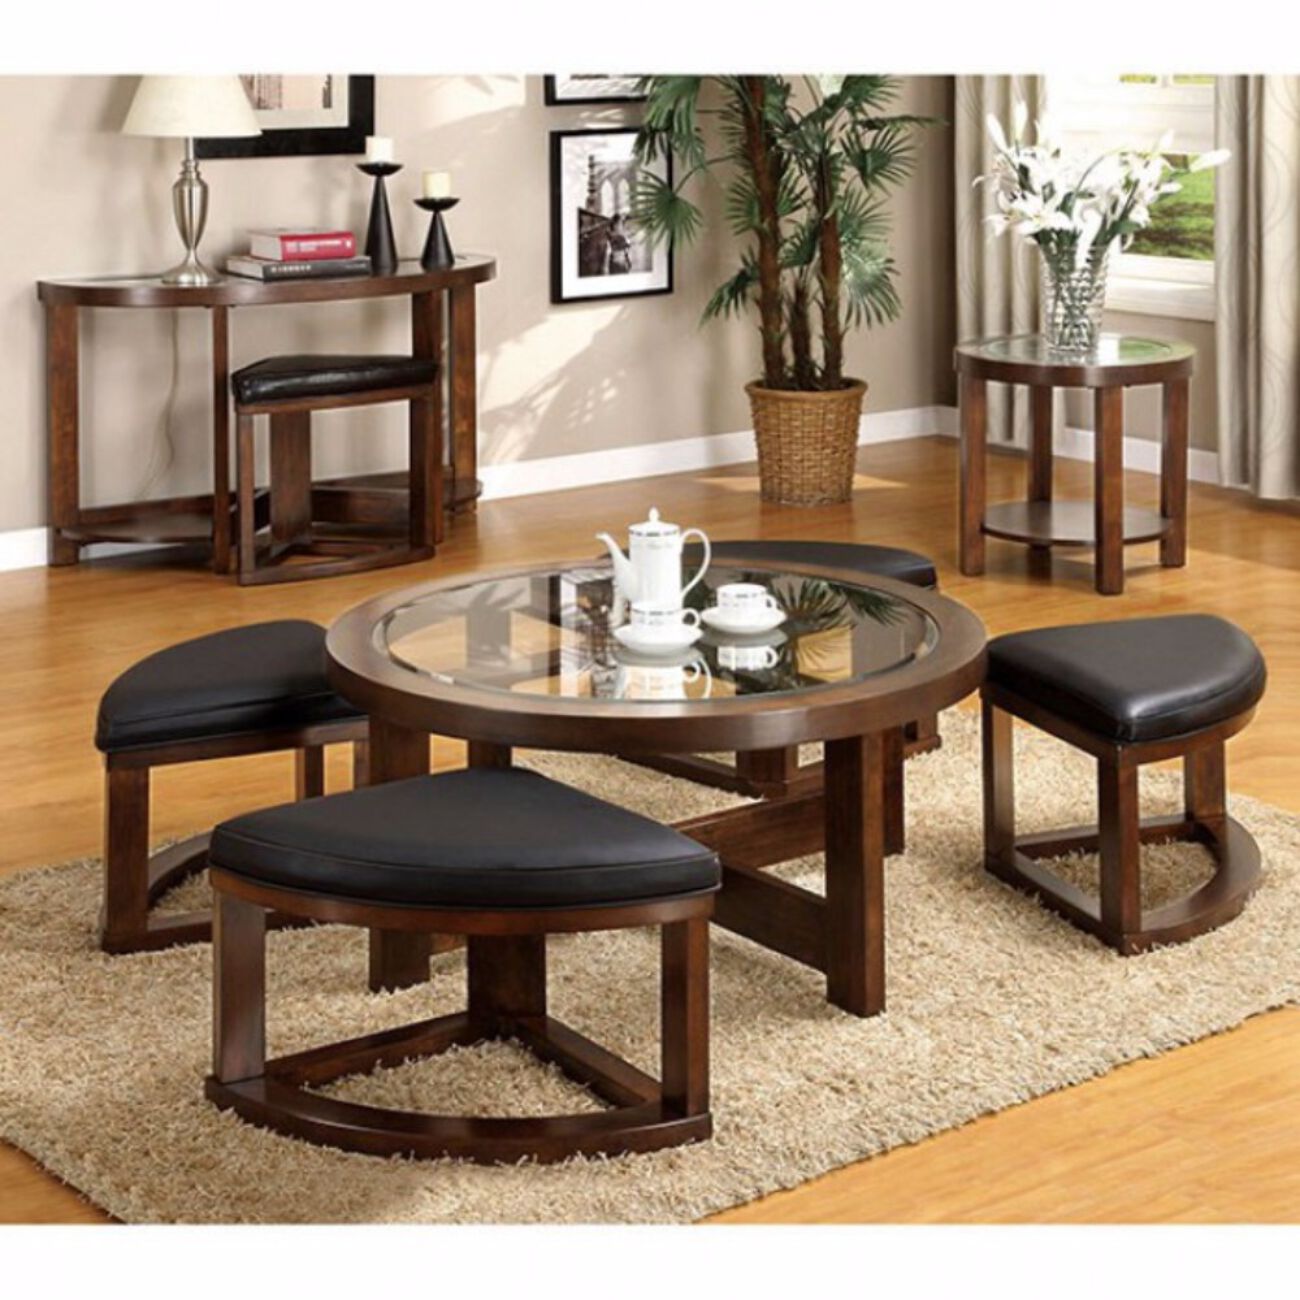 Round Wooden Coffee Table With Stylish Wedge Shaped 4 Ottomans